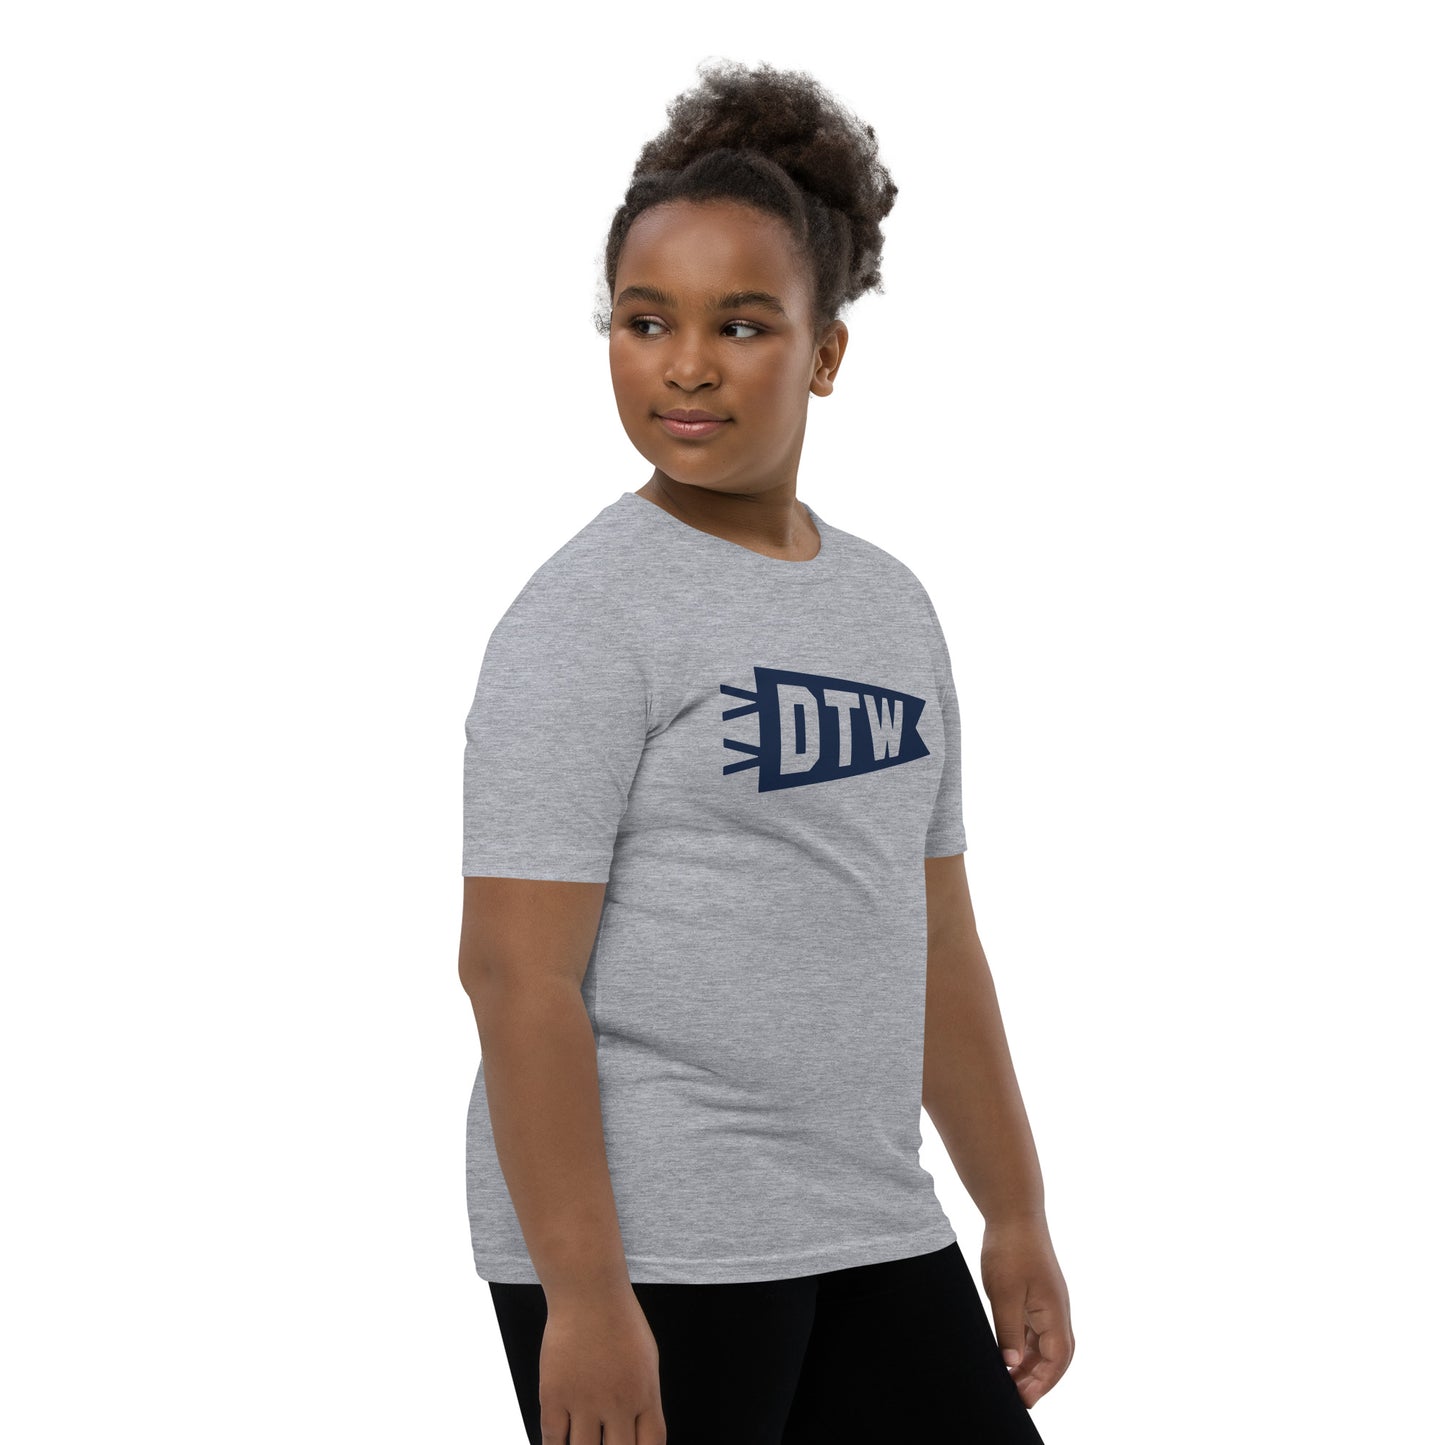 Kid's Airport Code Tee - Navy Blue Graphic • DTW Detroit • YHM Designs - Image 03